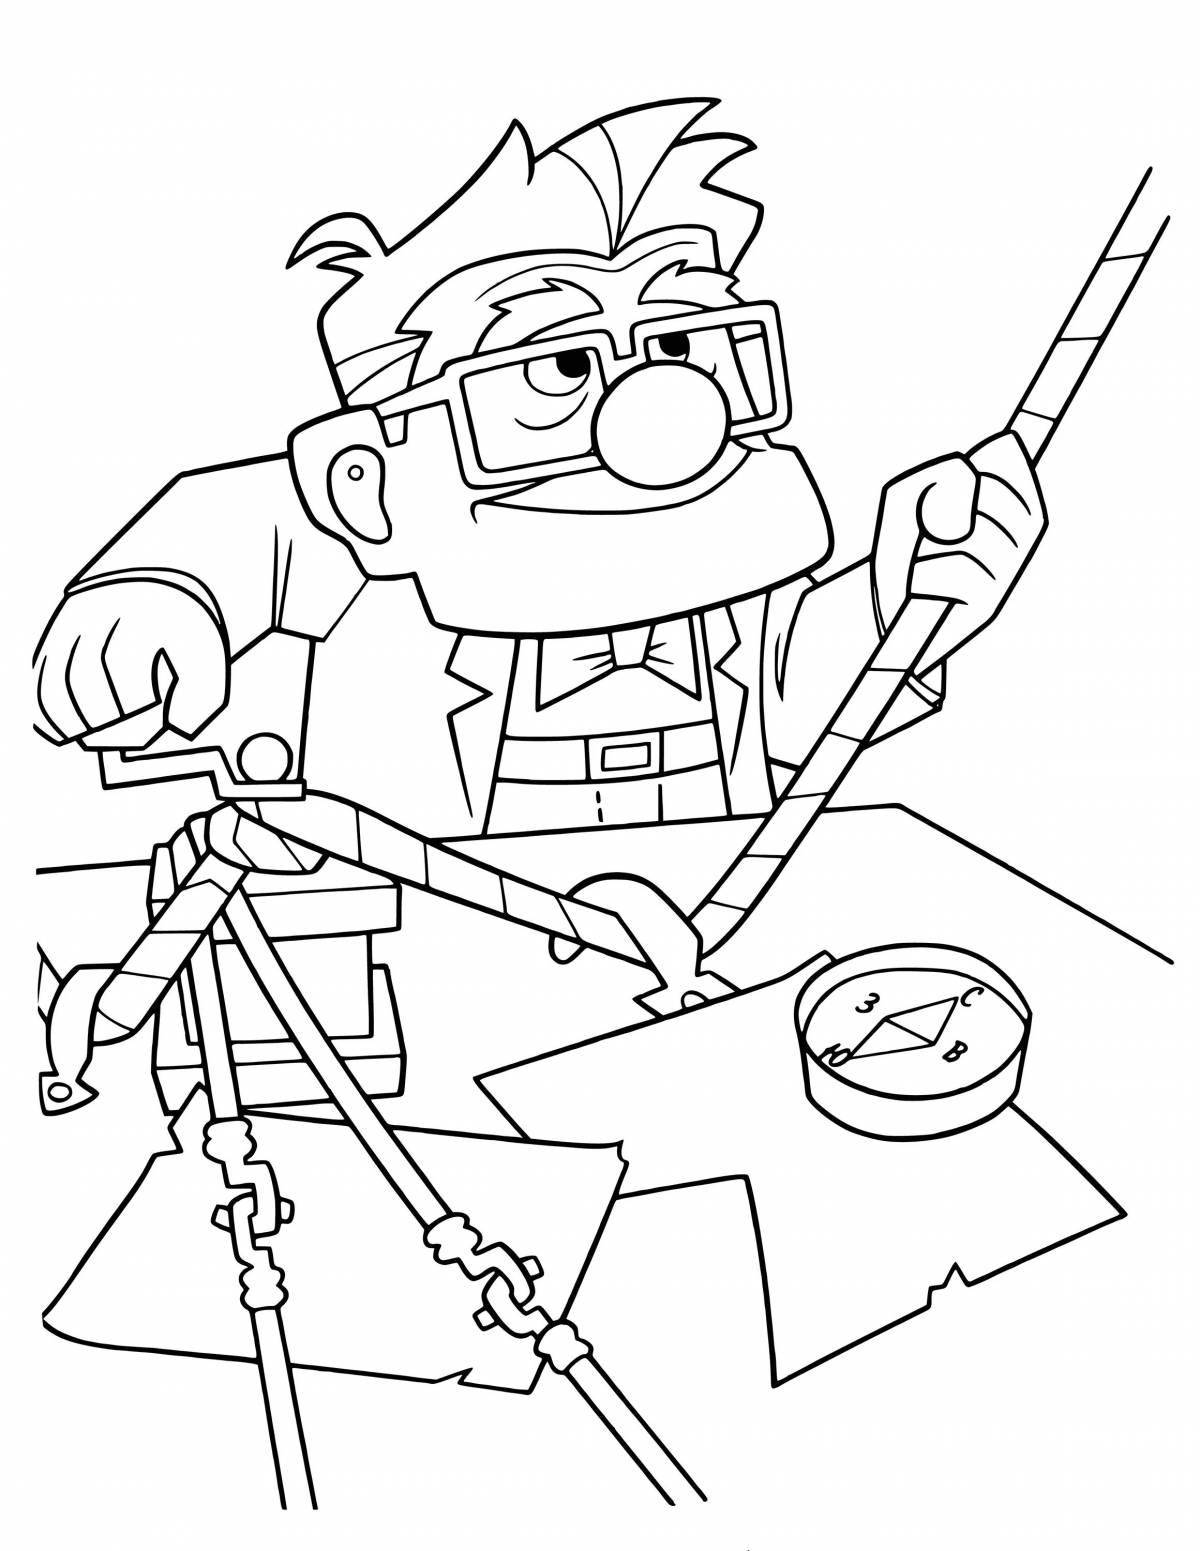 Magic coloring page up